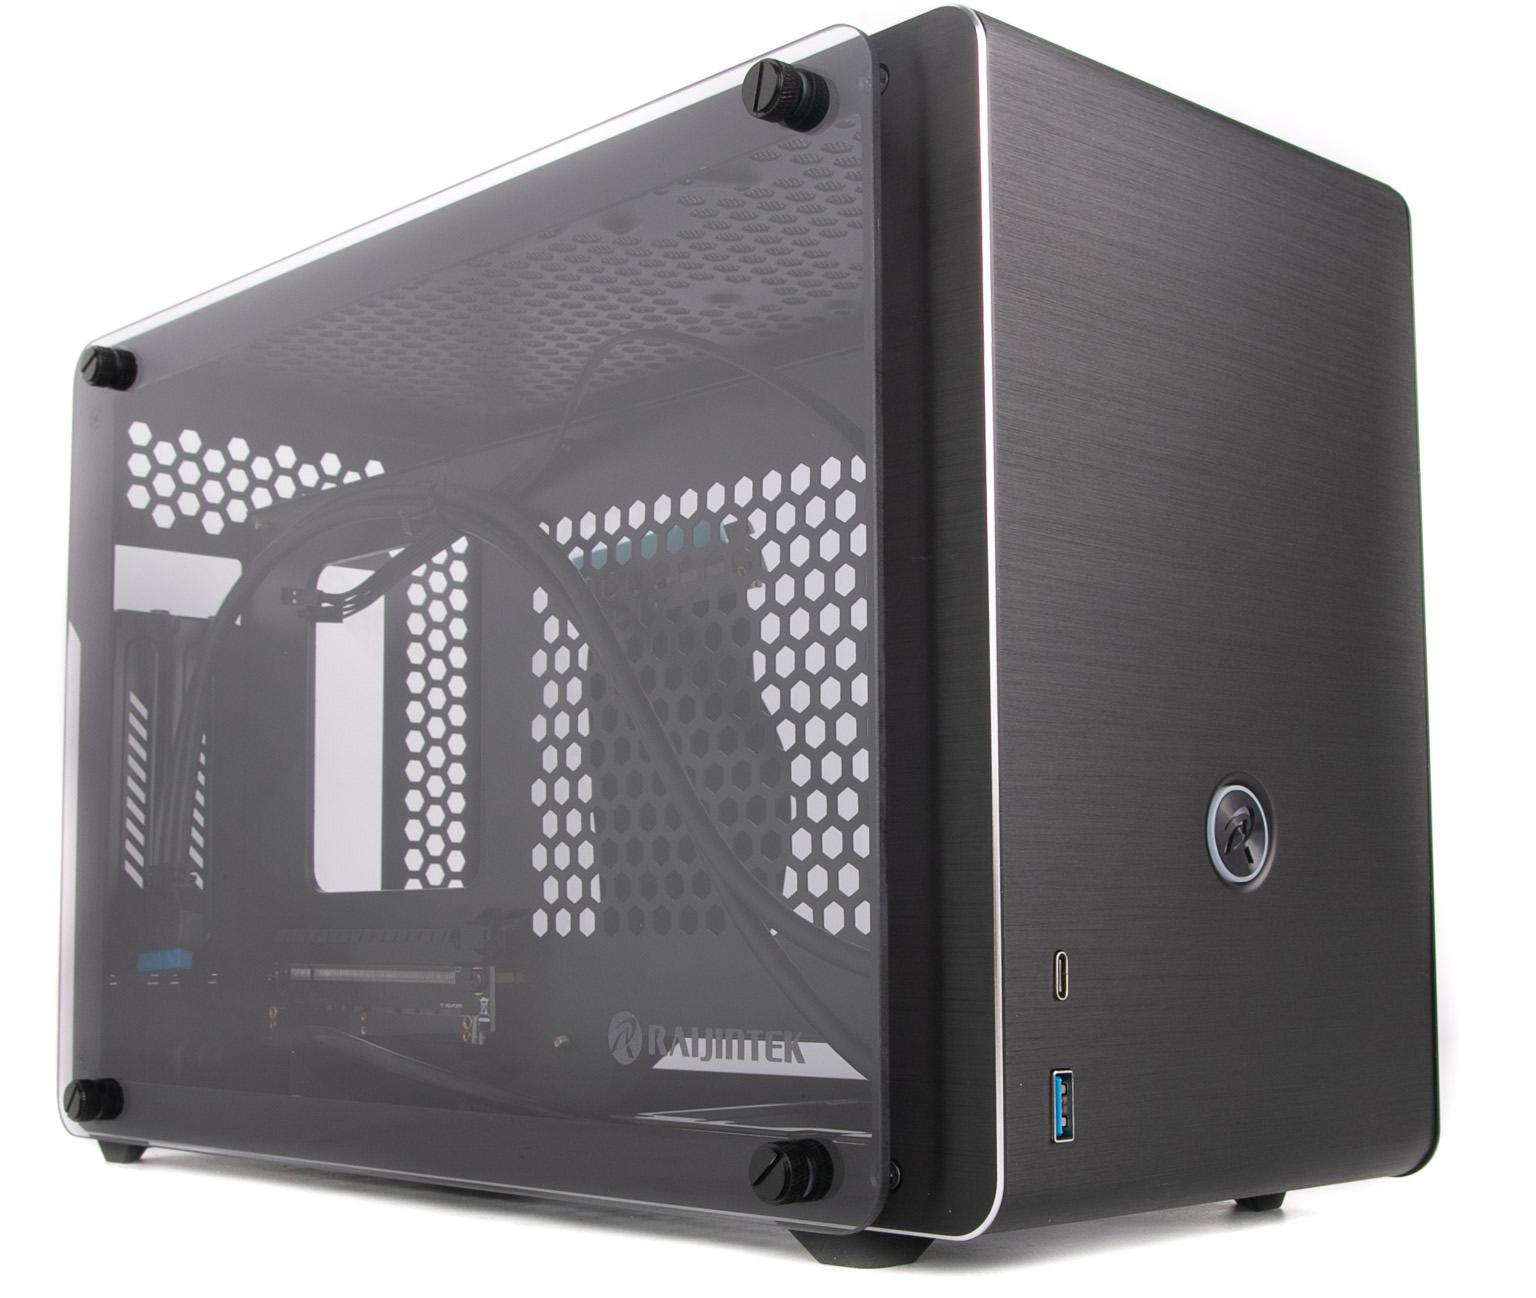 Raijintek Ophion Computer Case with Tempered Glass for $109.99 Shipped